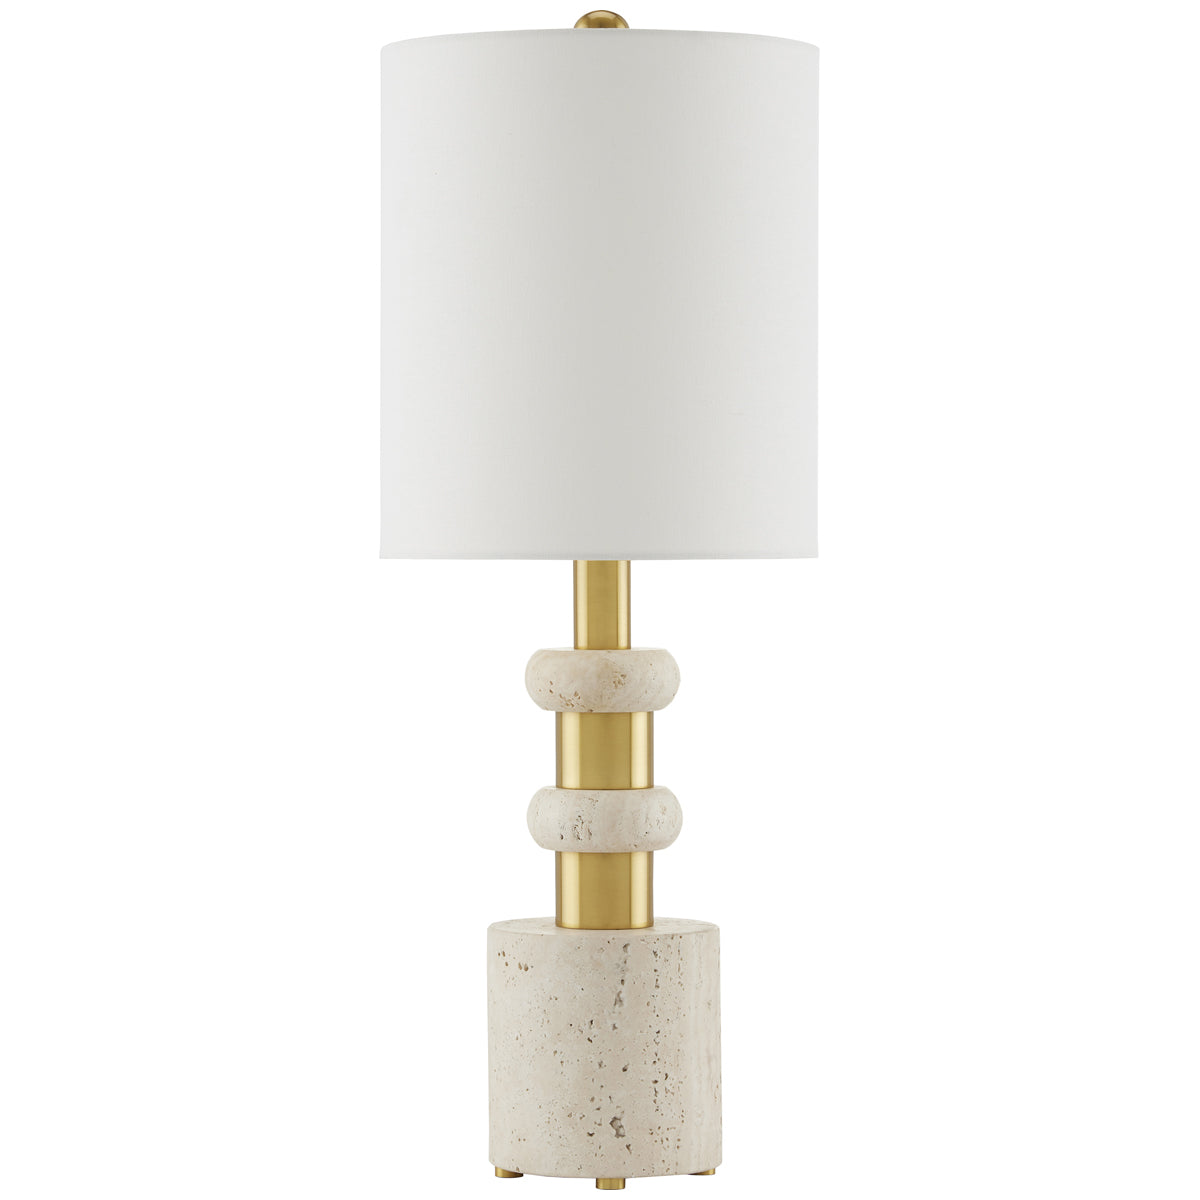 Currey and Company Goletta Table Lamp